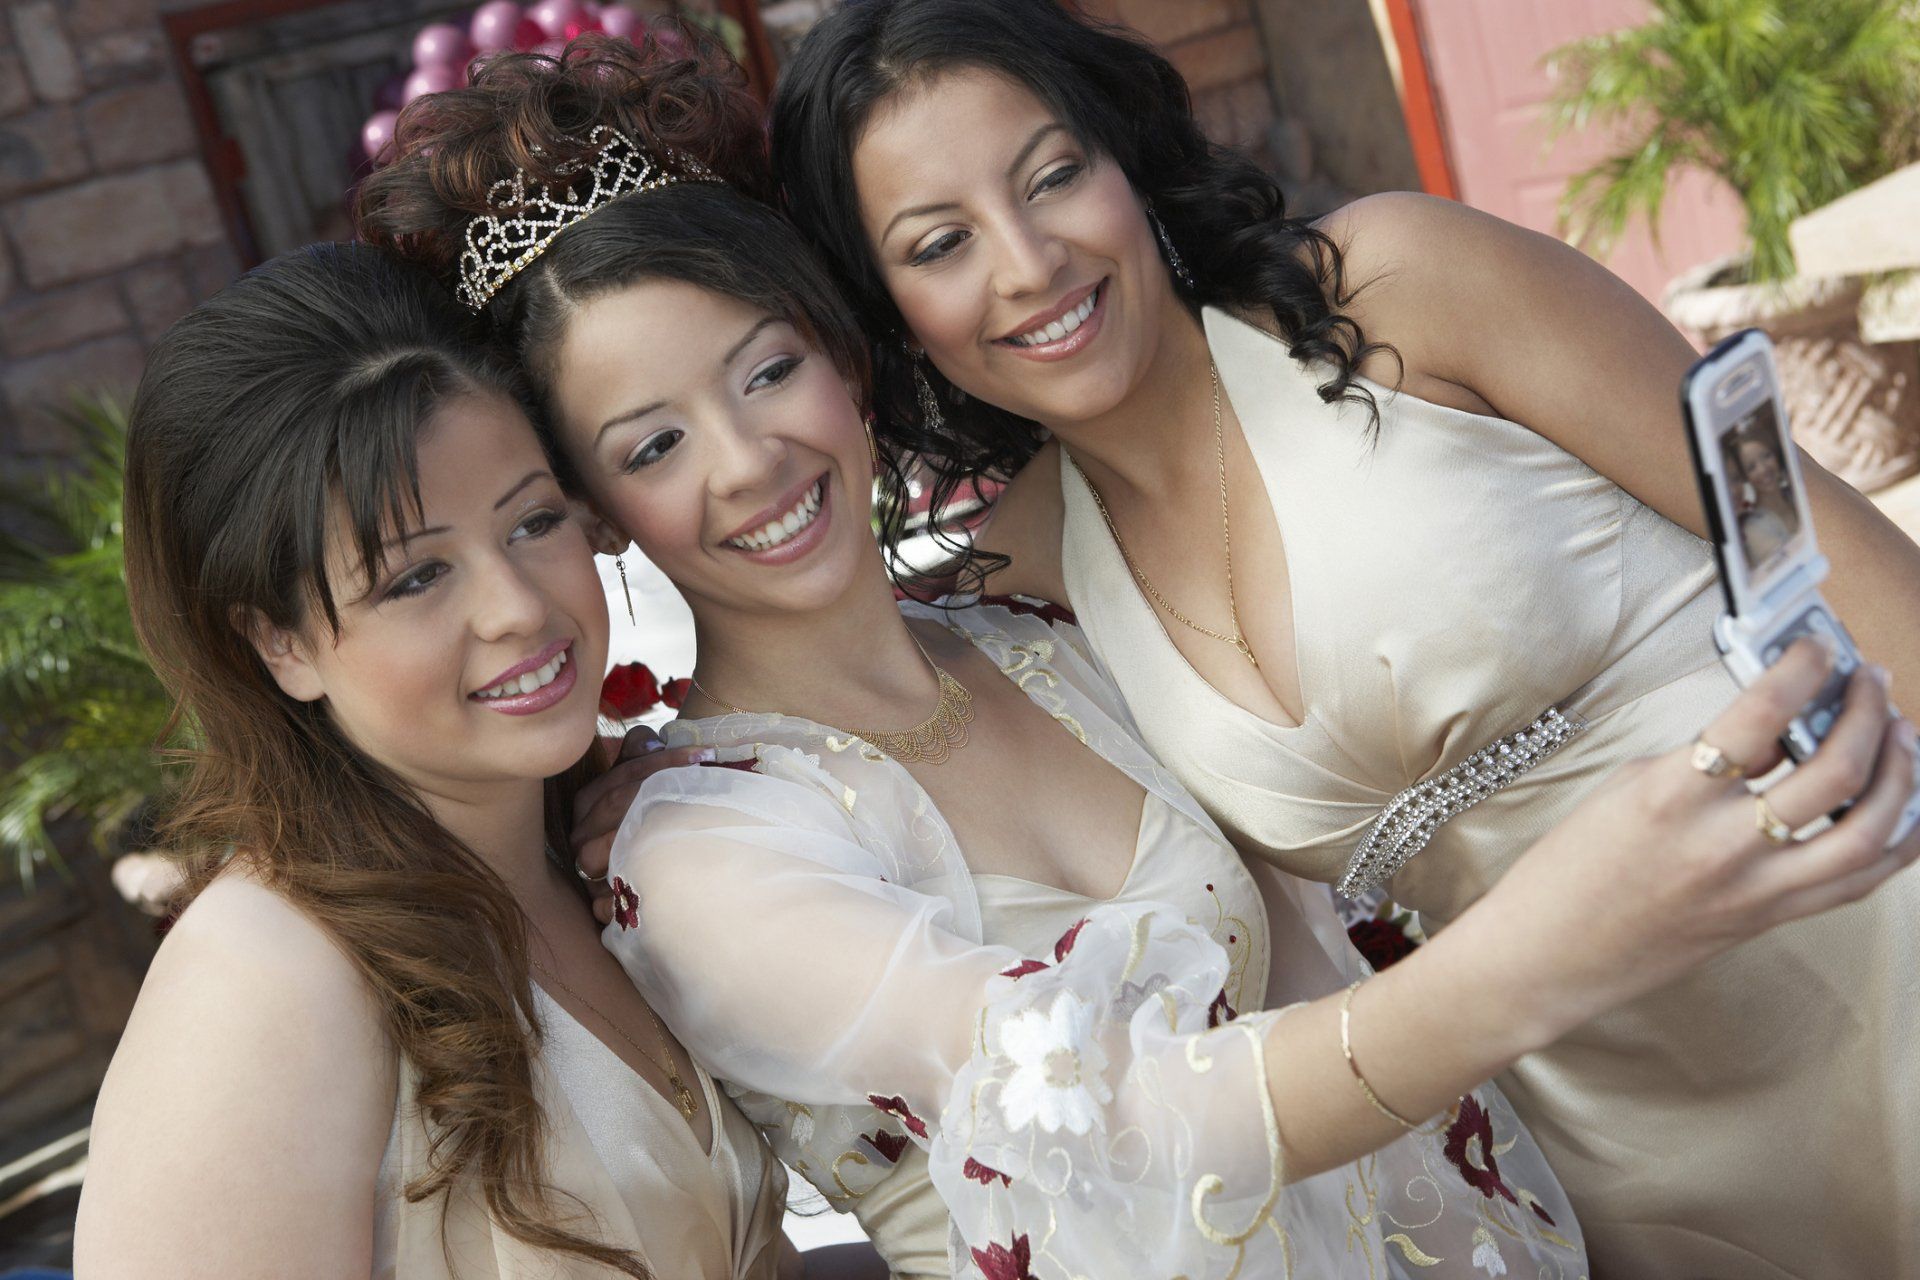 Girl (13-15) taking self-portrait with two friends using mobile phone at Quinceanera